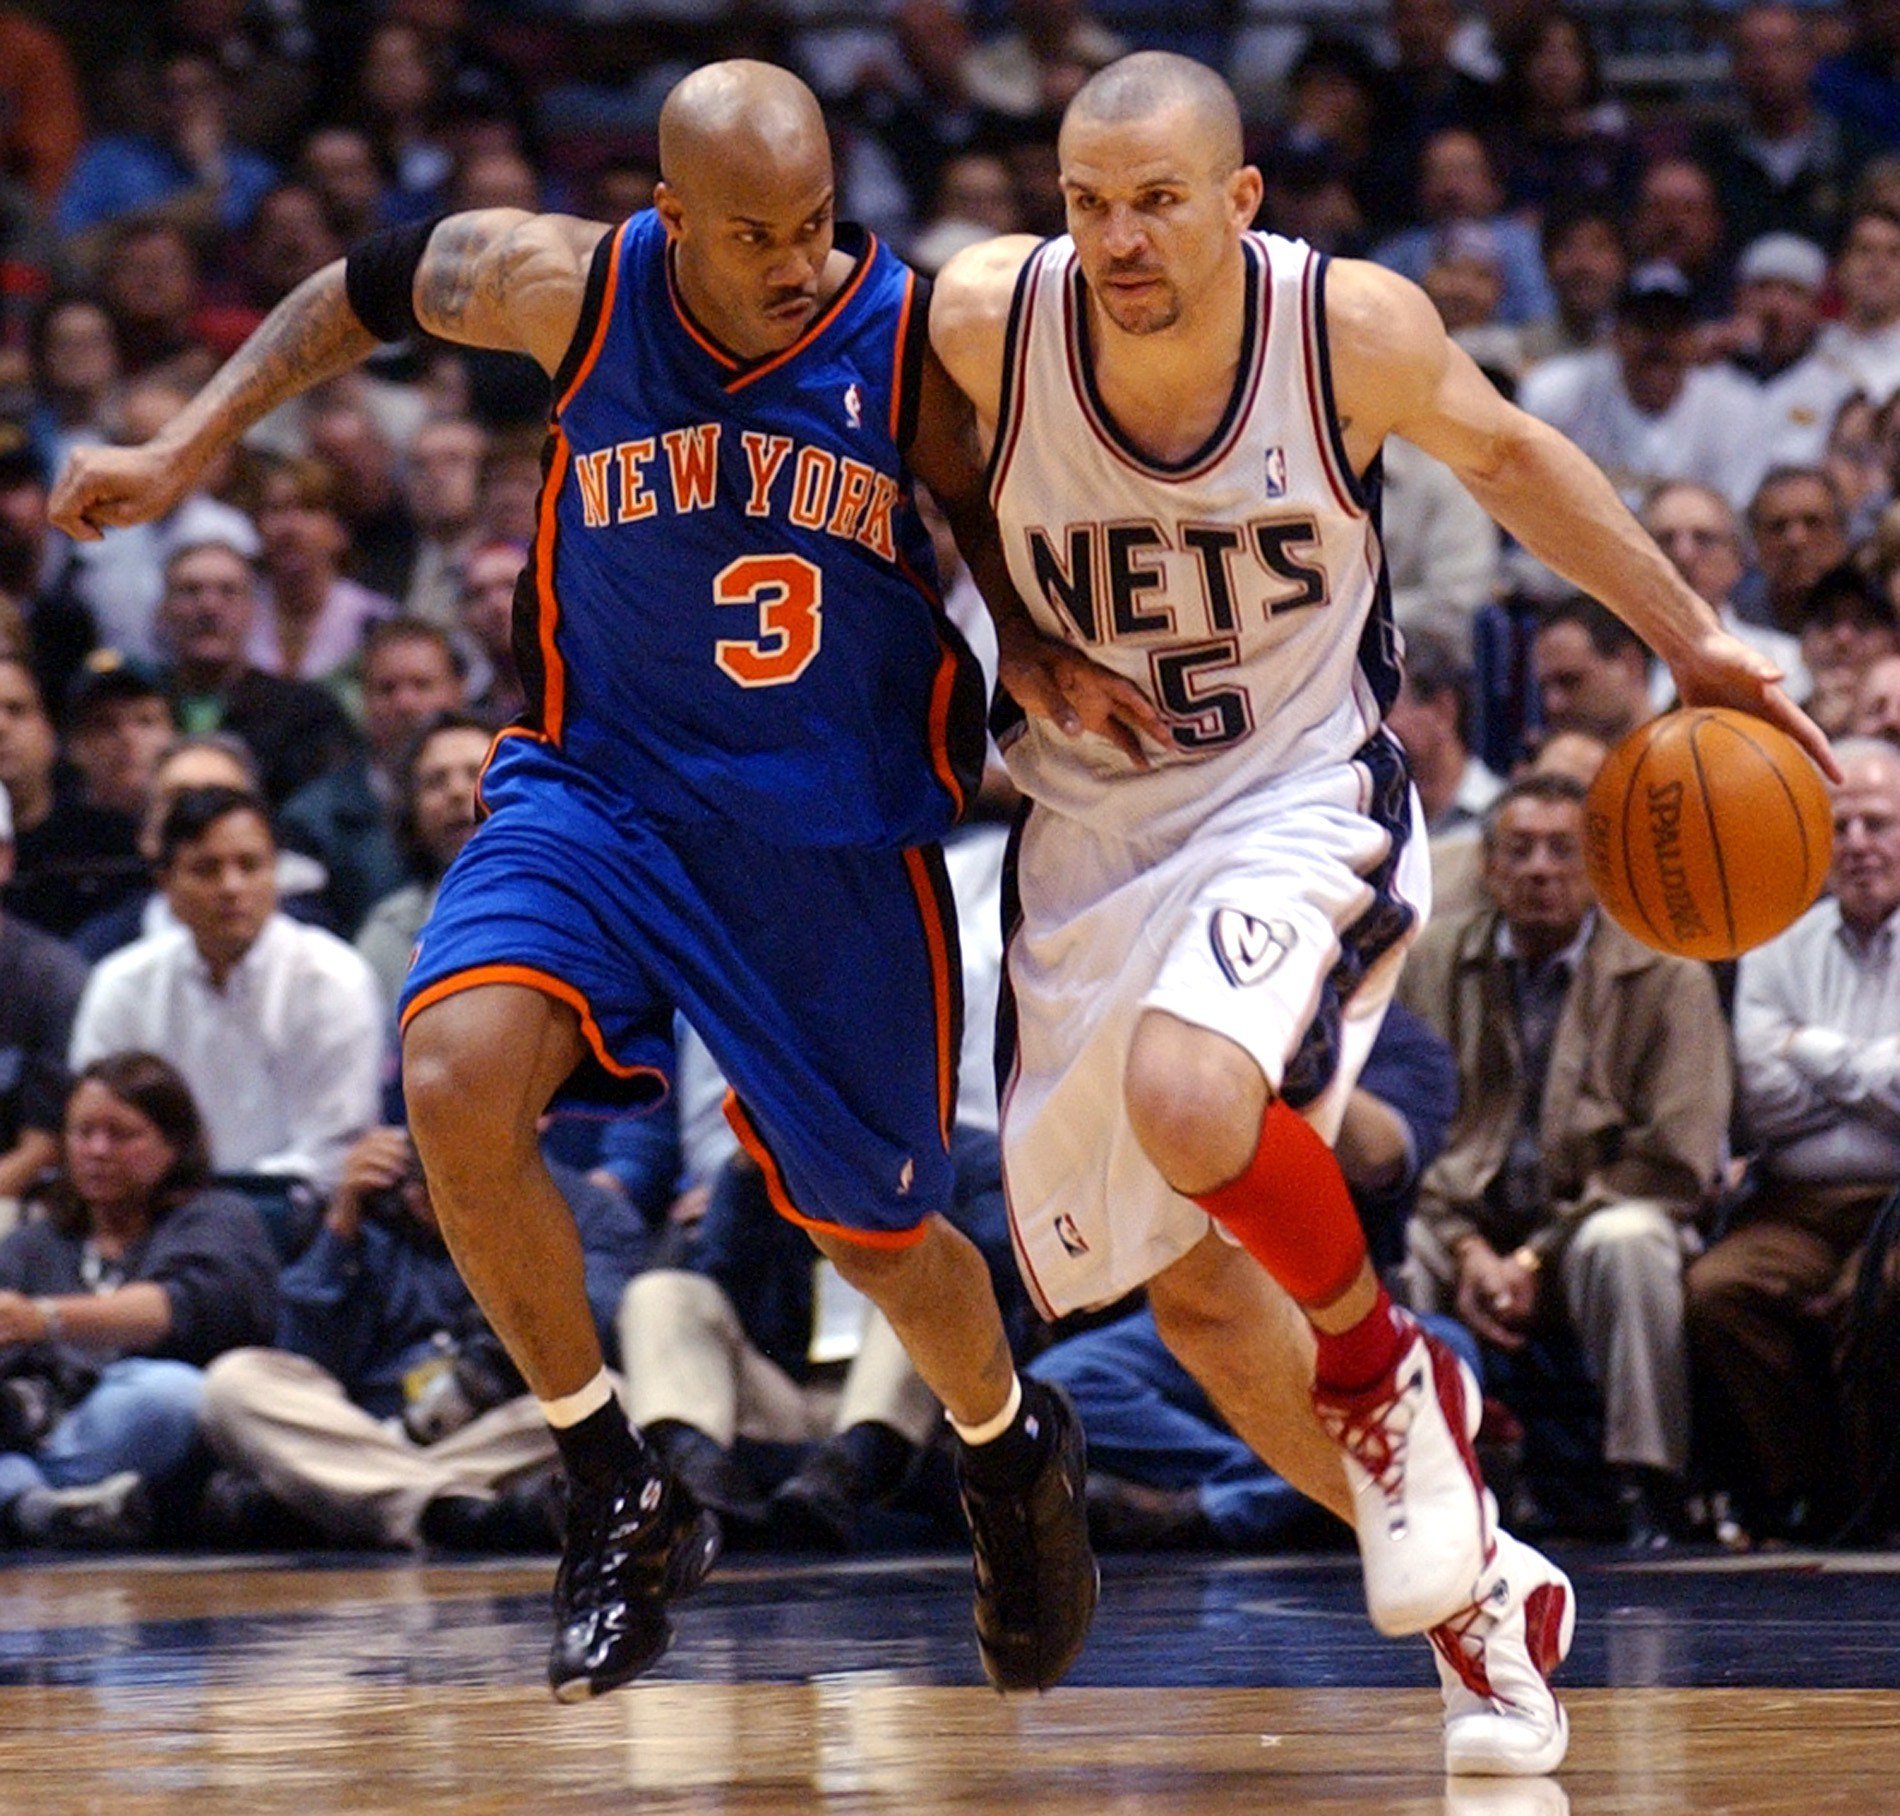 Jason Kidd of the New Jersey Nets brings the ball upcourt during